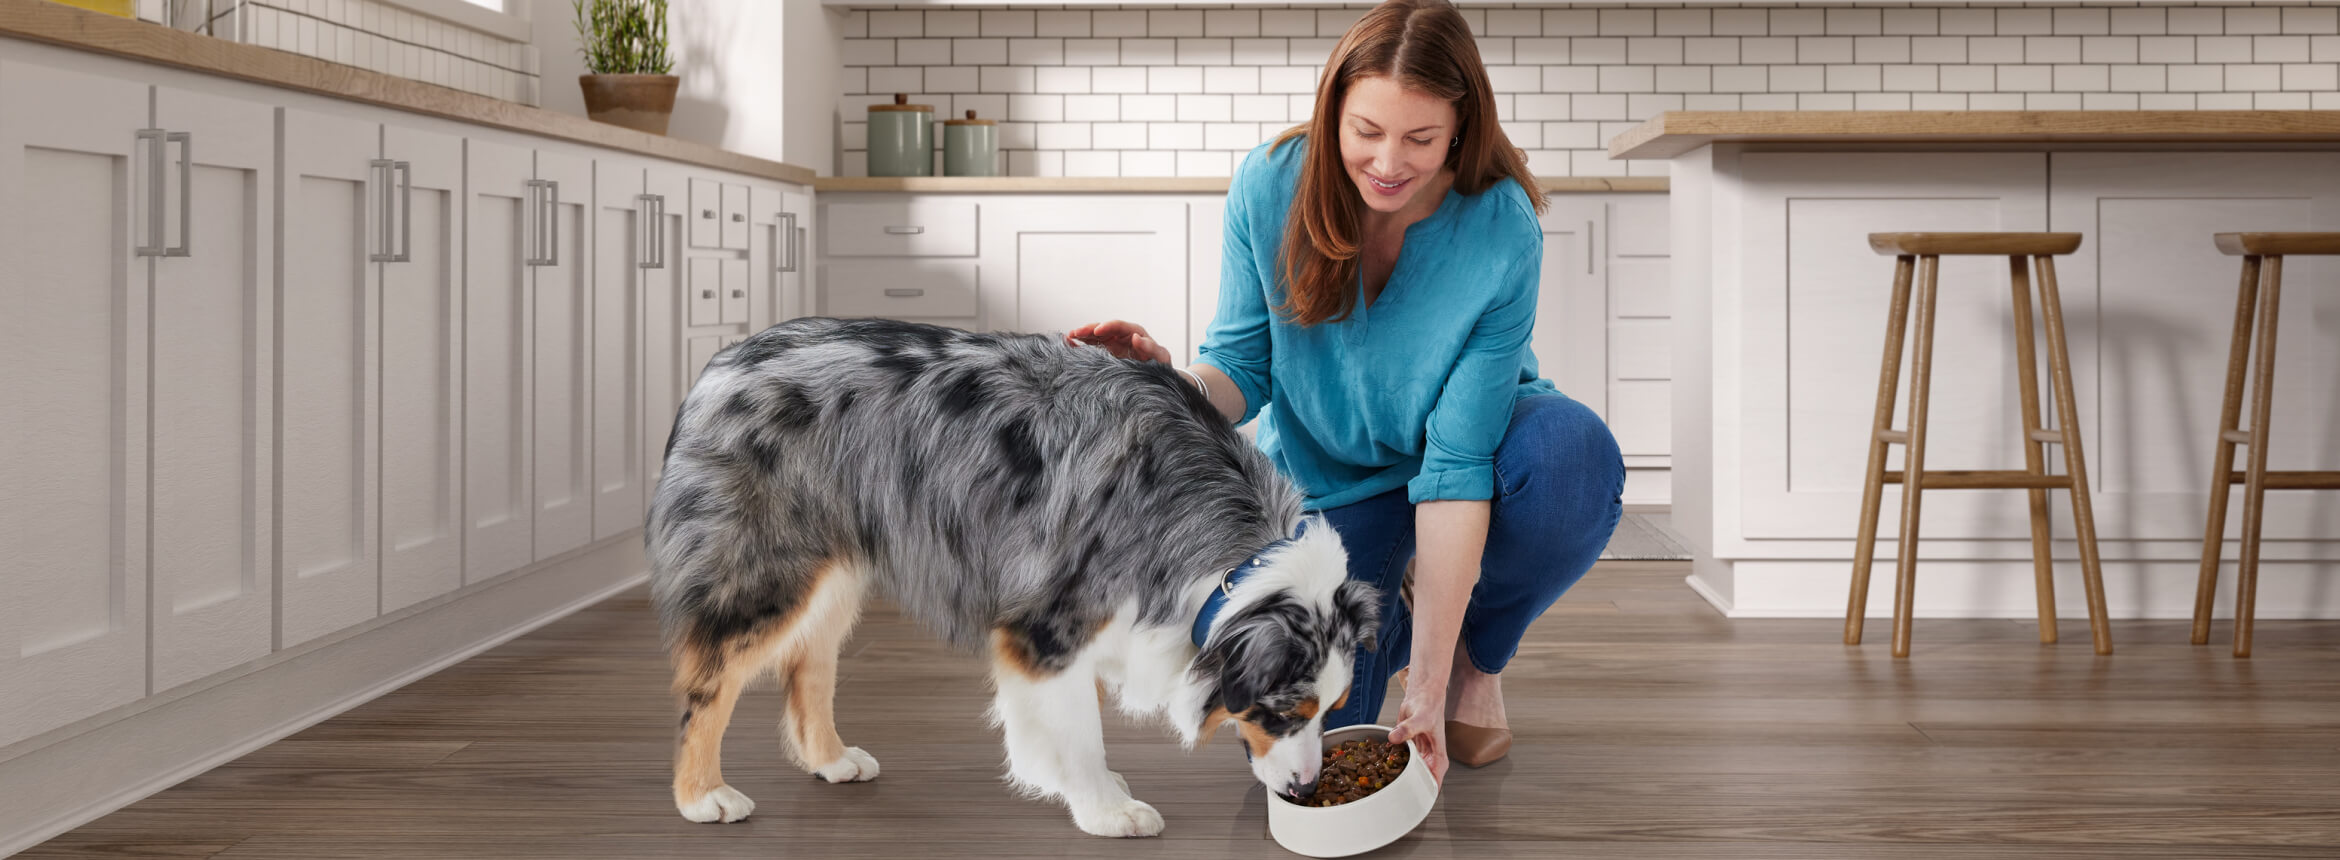 Blue Buffalo - A woman tenderly feeding her dog food while kneeling down, showing love and care towards her furry companion.